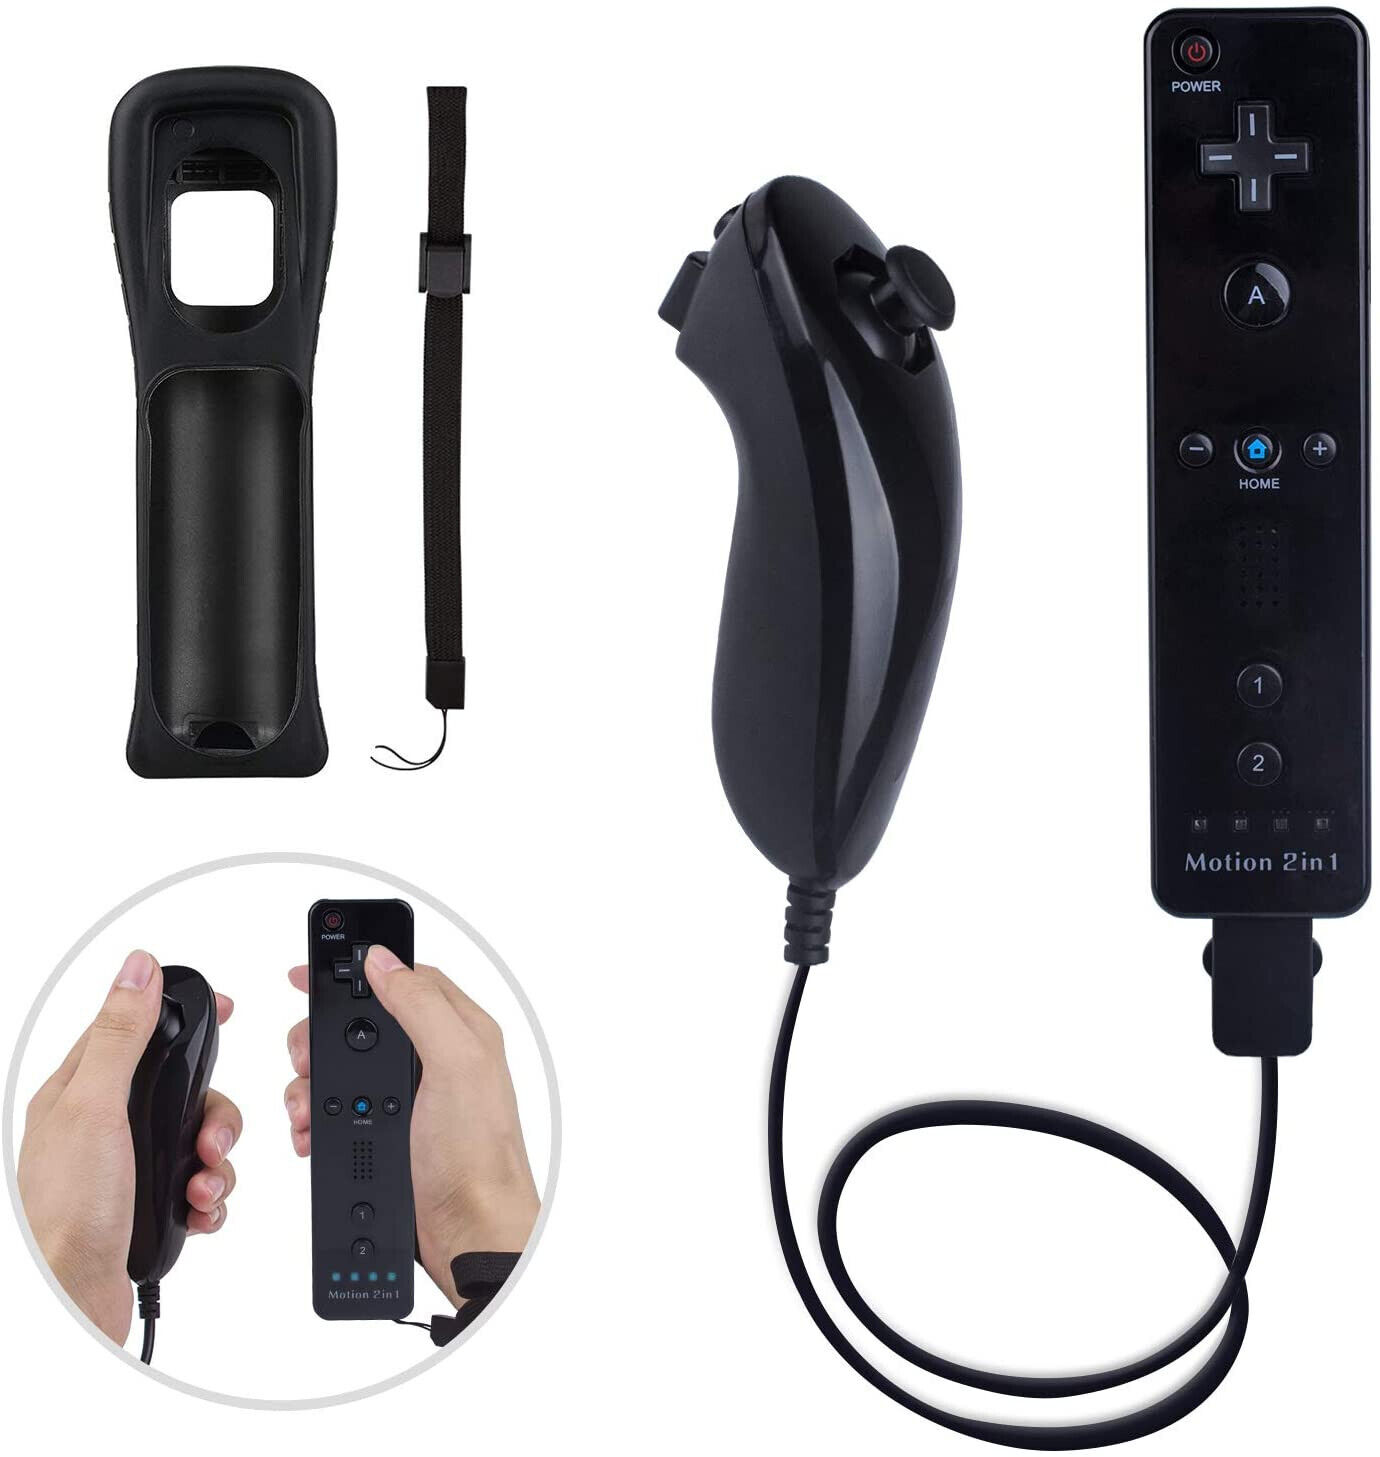 GCP Products Built In Motion Plus Remote Controller & Nunchuck For Nintendo Wii/Wii U W/ Case